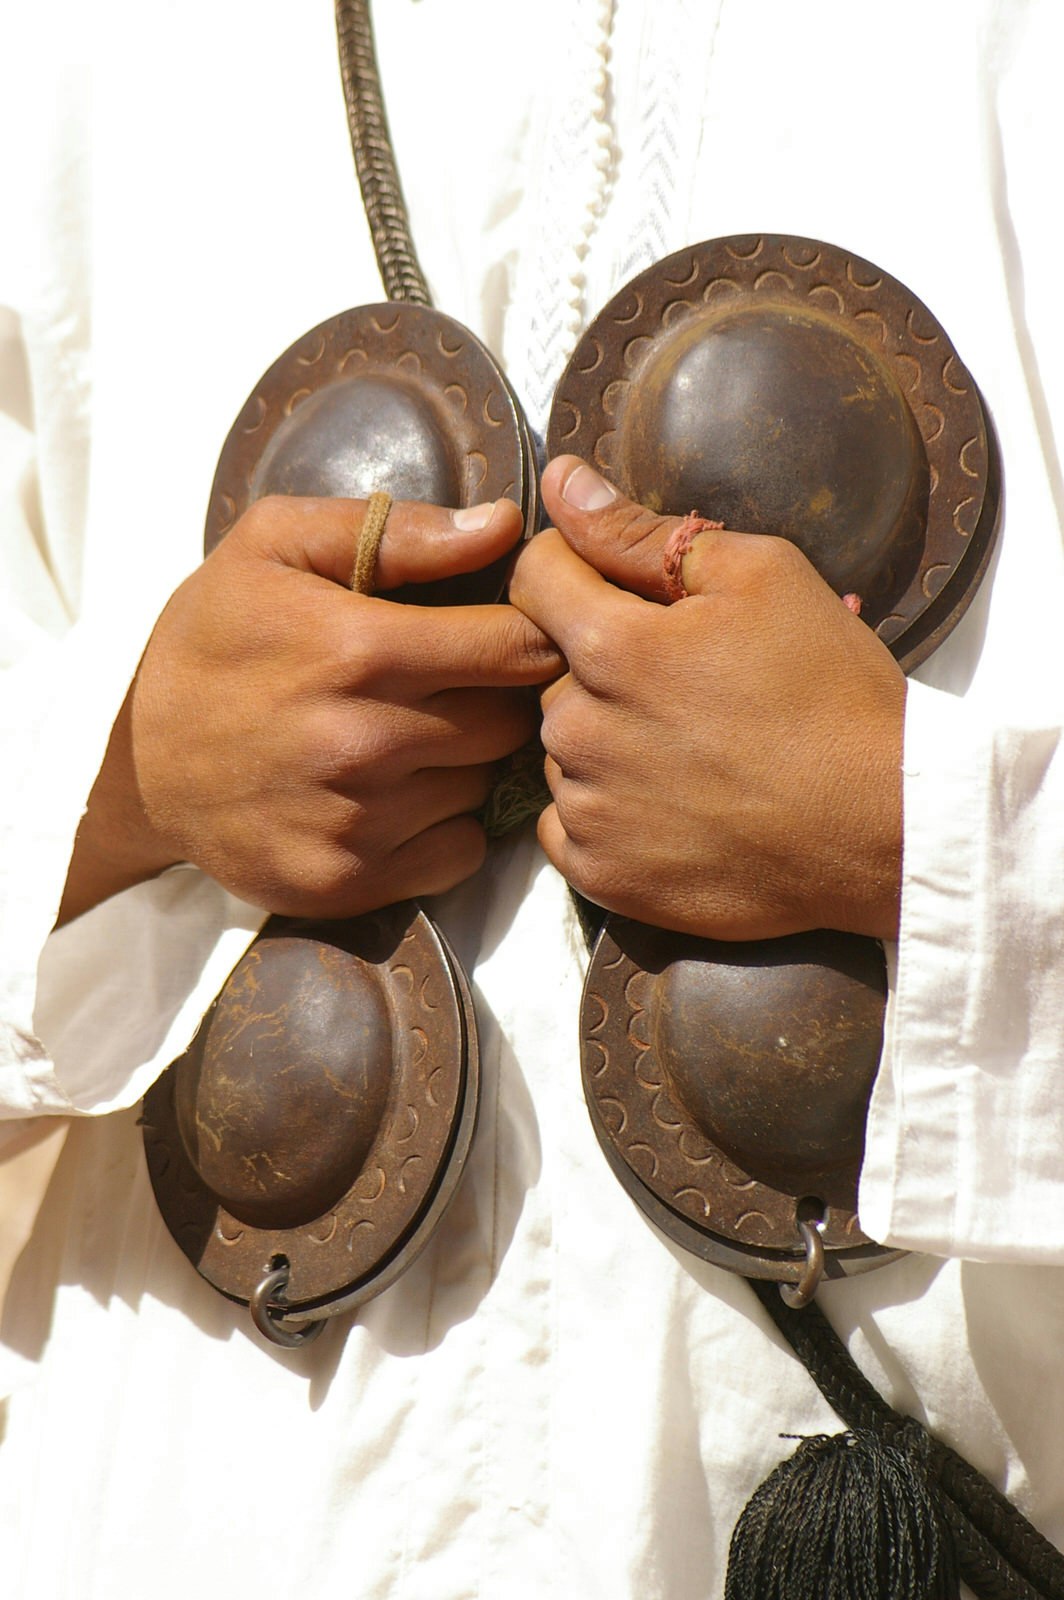 Close up of iron castanets, played by a musician at Essaouira's Gnaoua and World Music Festival. Image by Sallyrango / Getty